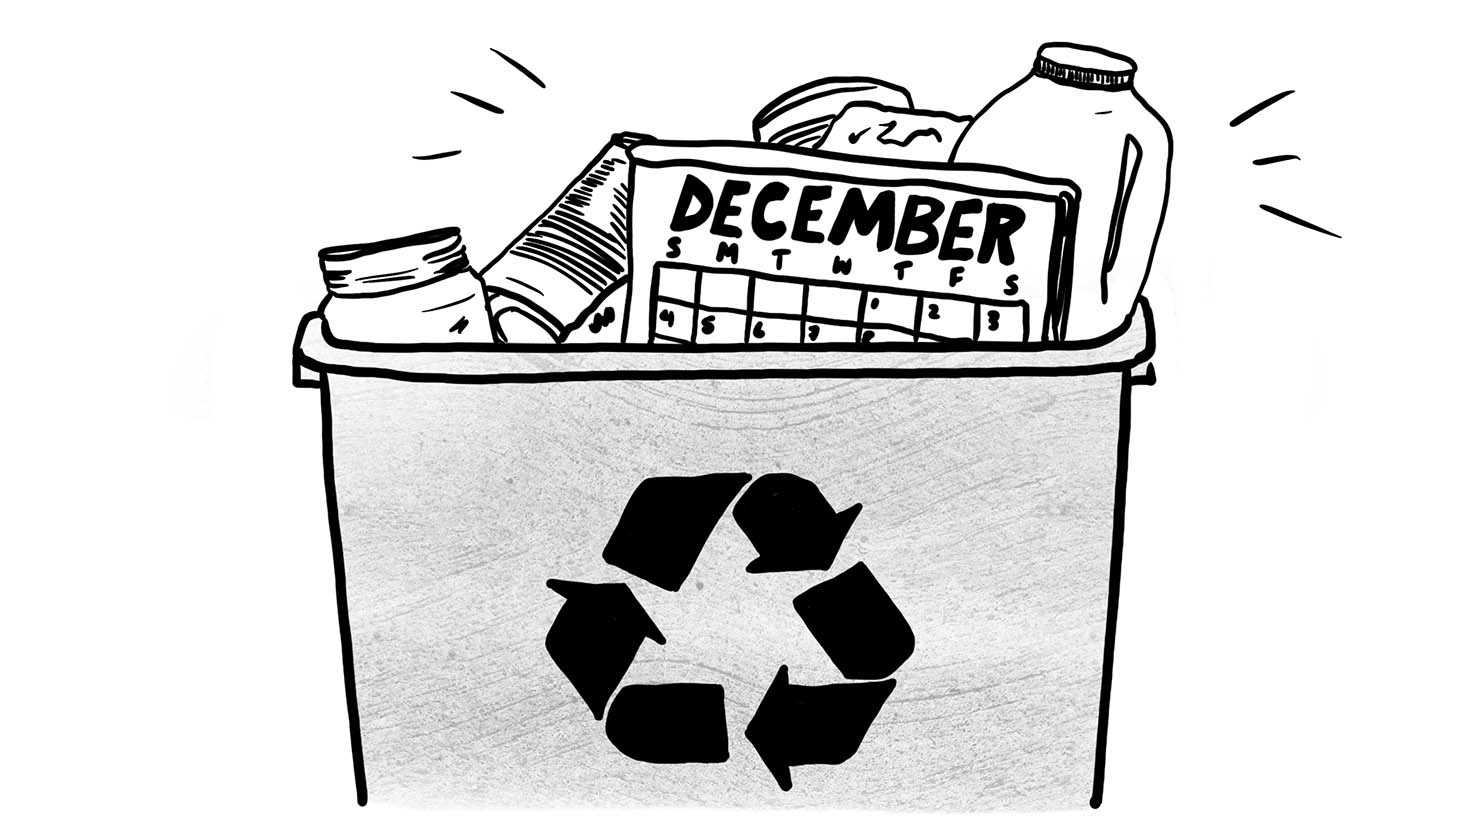 Illustration of the December of last year's calendar peeking out of recycling bin